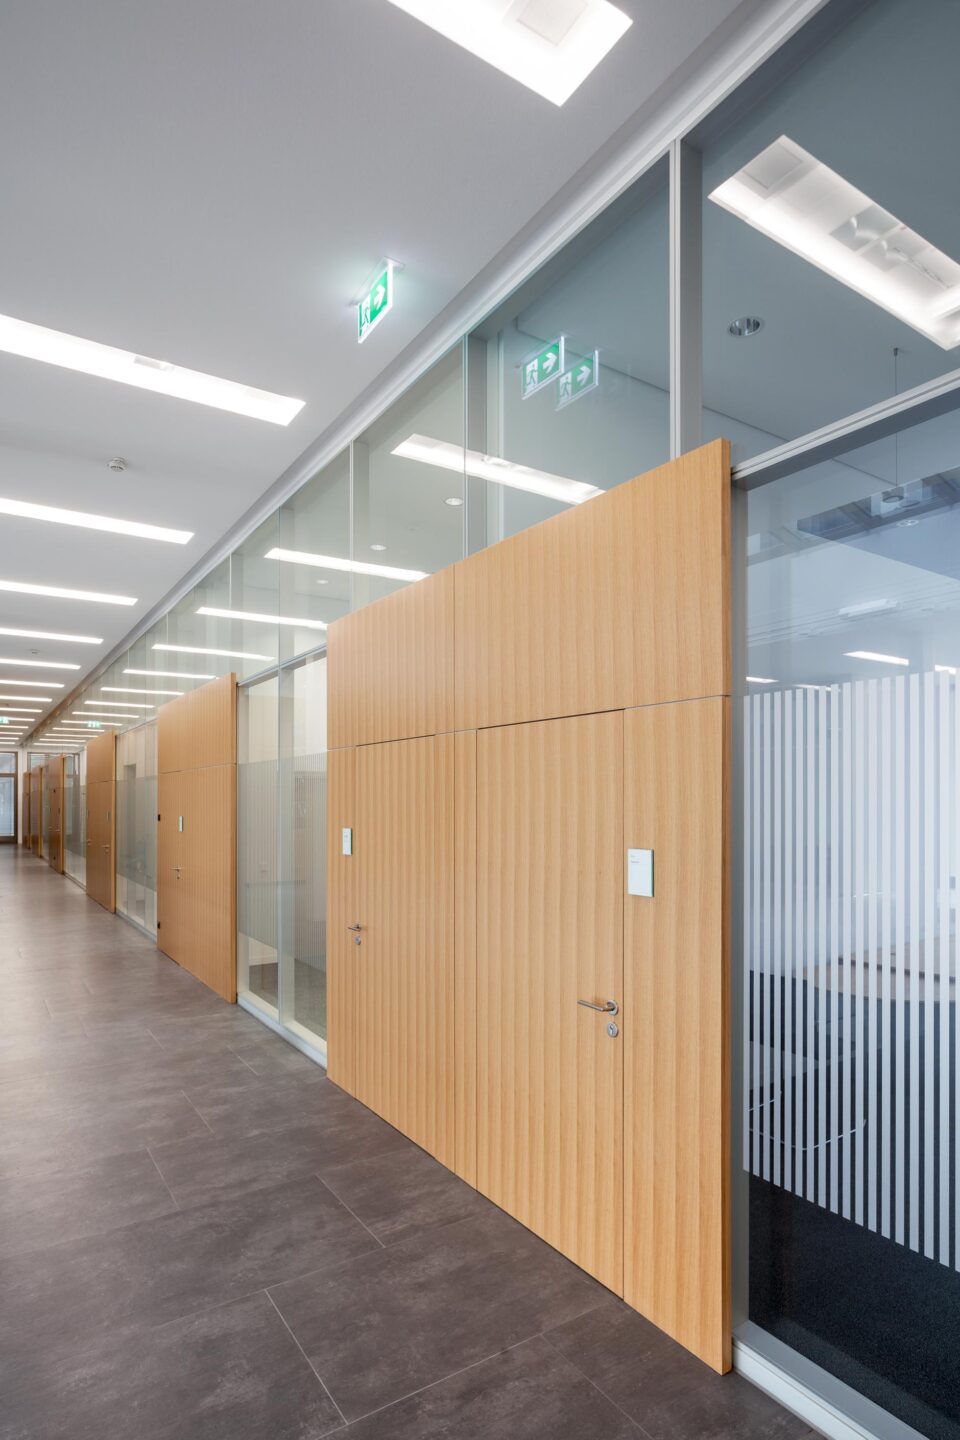 Sparkasse Ulm Haus 66 │ glass wall on the corridor side │ fecostruct